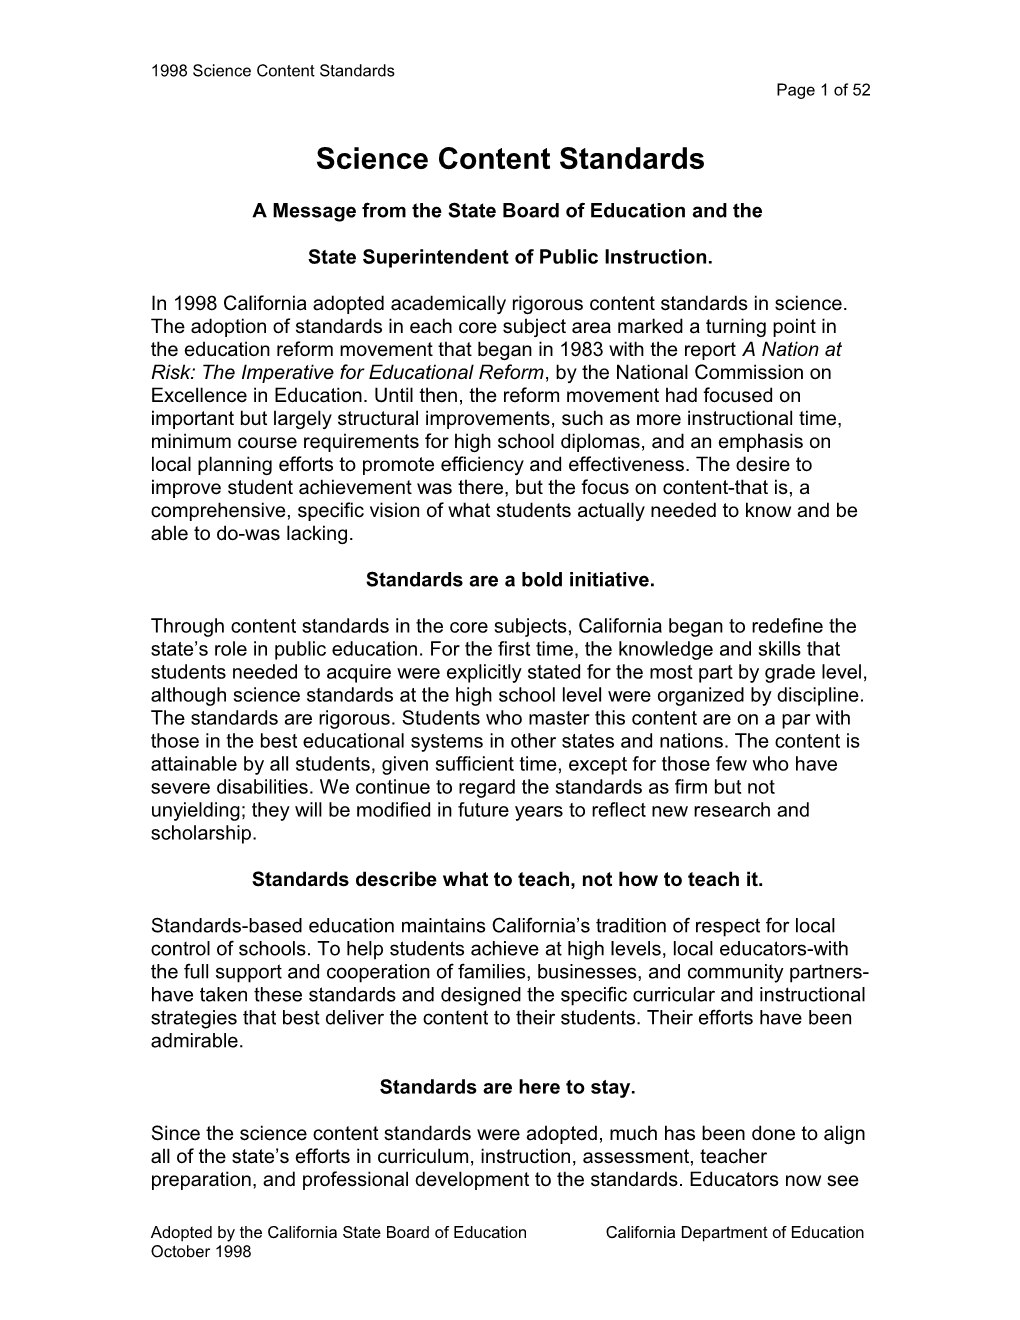 1998 Science Content Standards - Content Standards (CA Dept of Education)